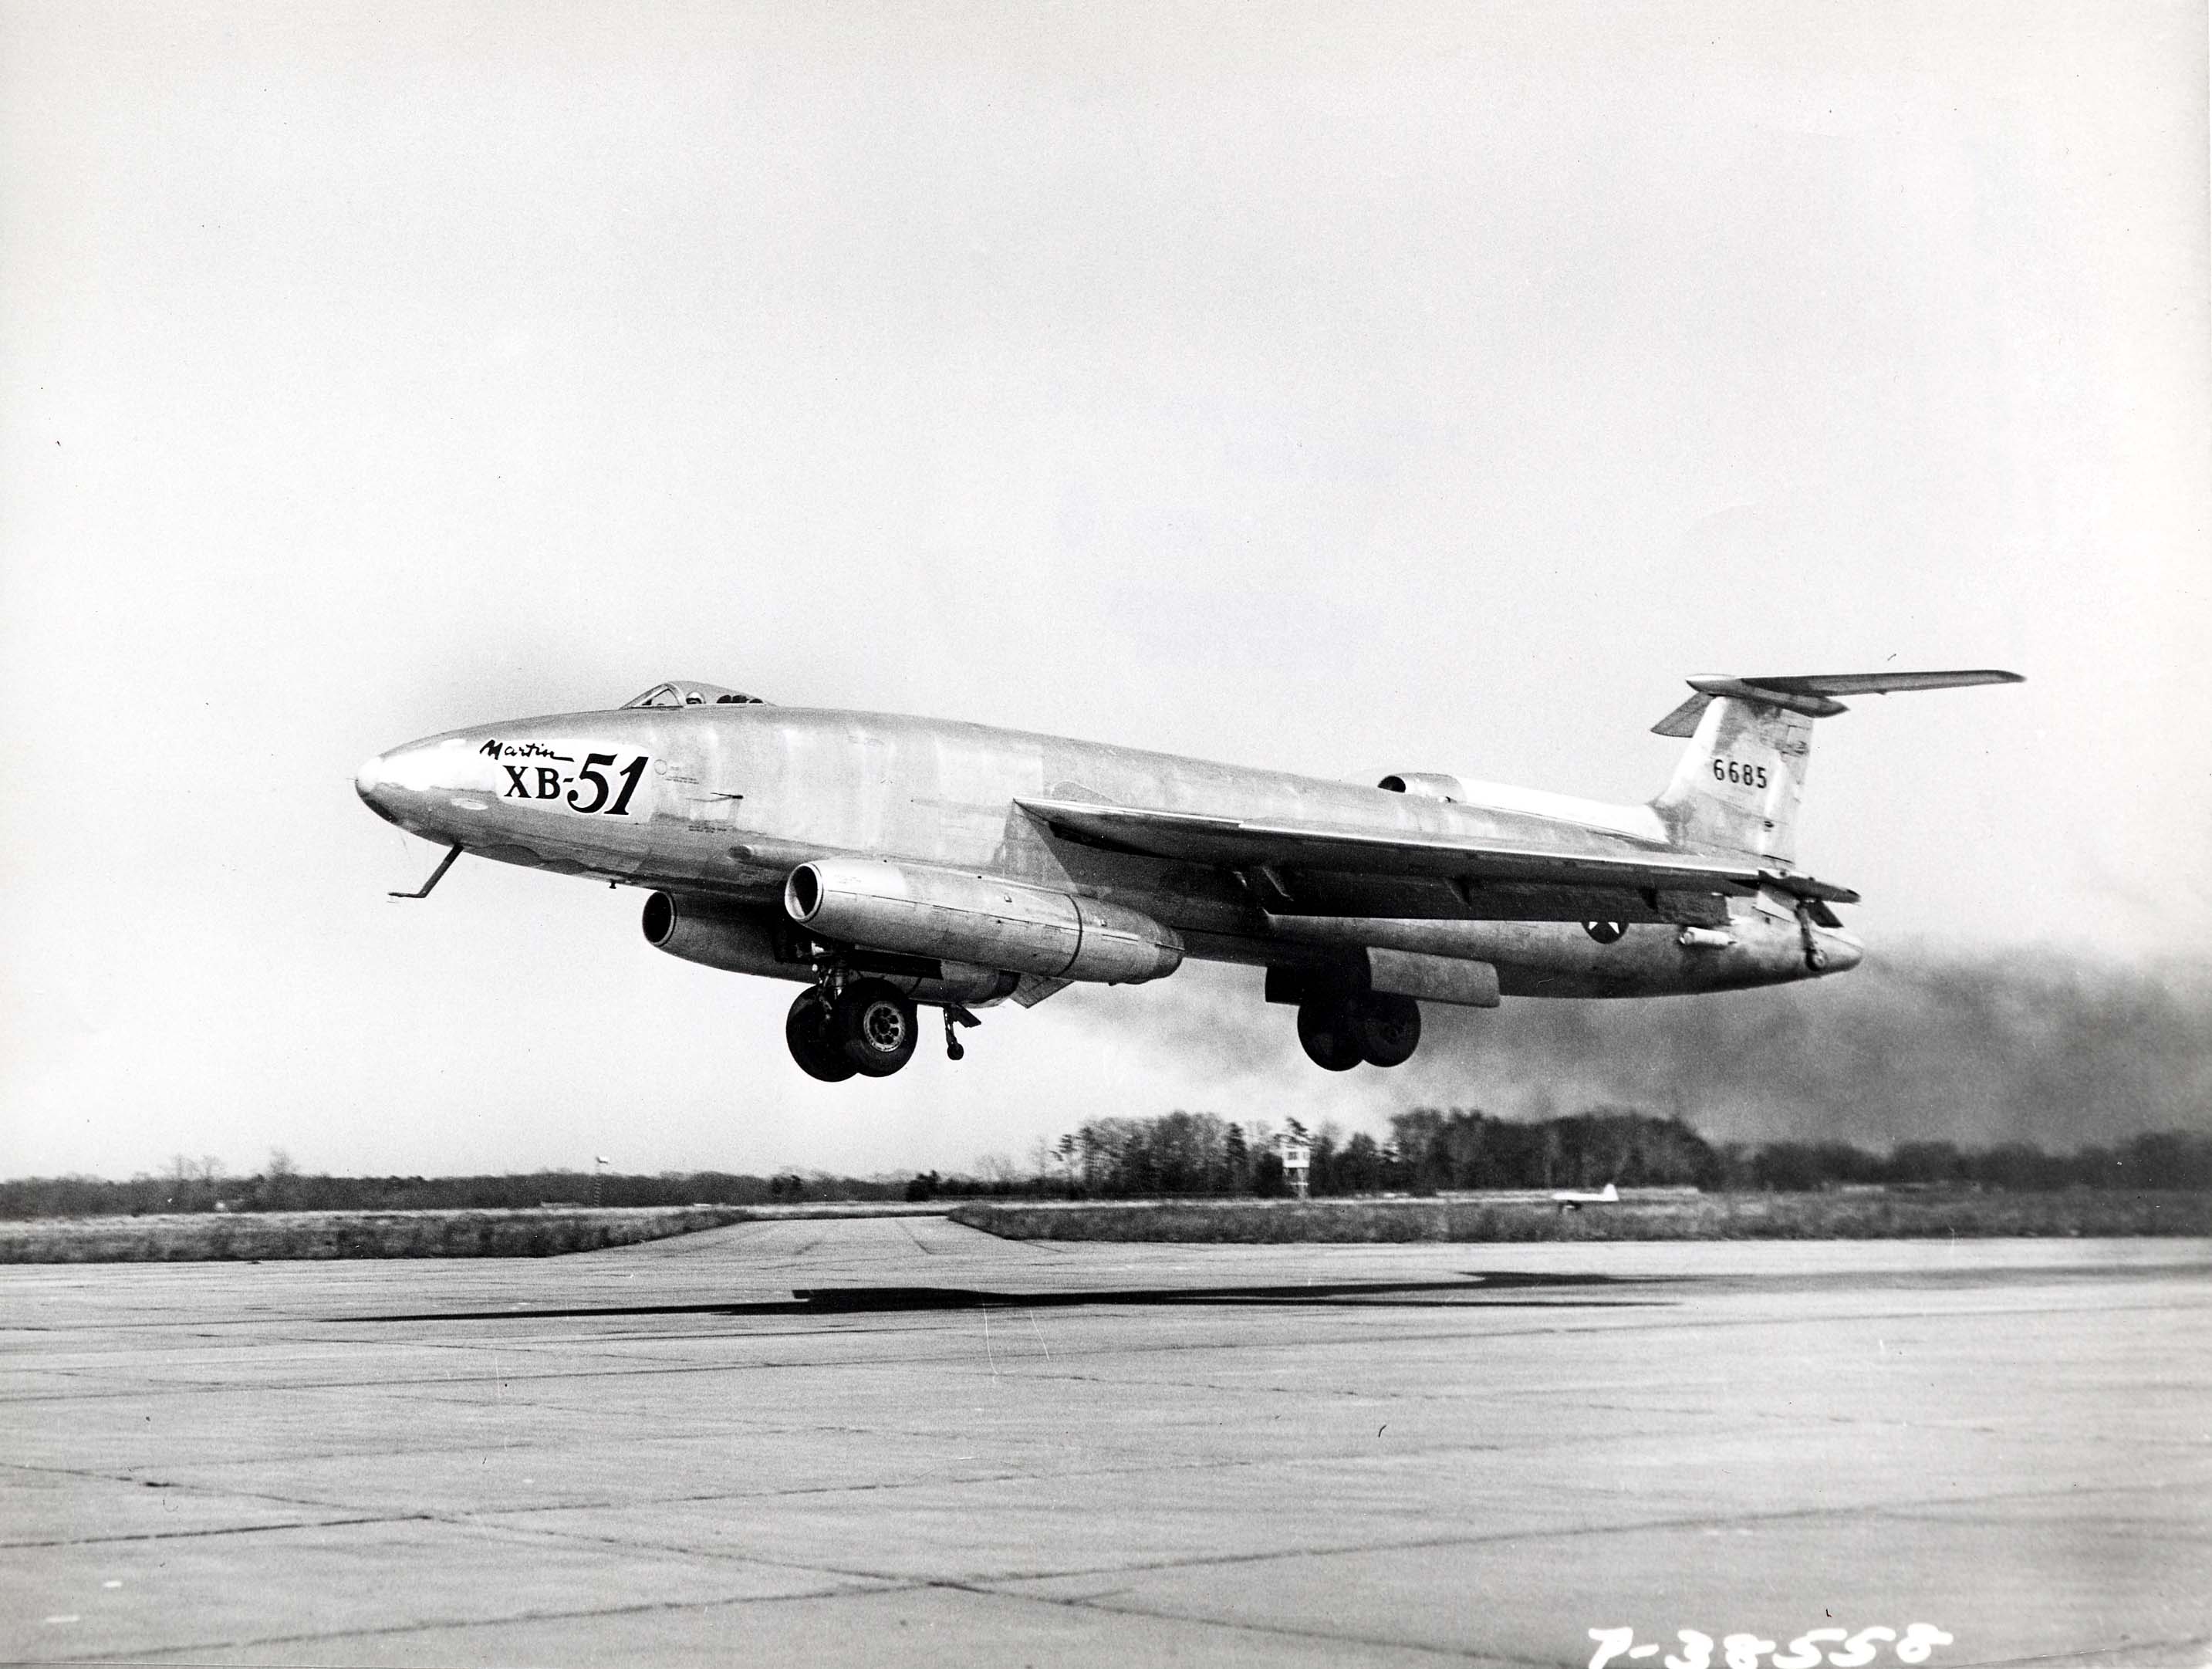 Martin XB-51 46-685, the number one prototype, on takeoff. (U.S. Air Force)